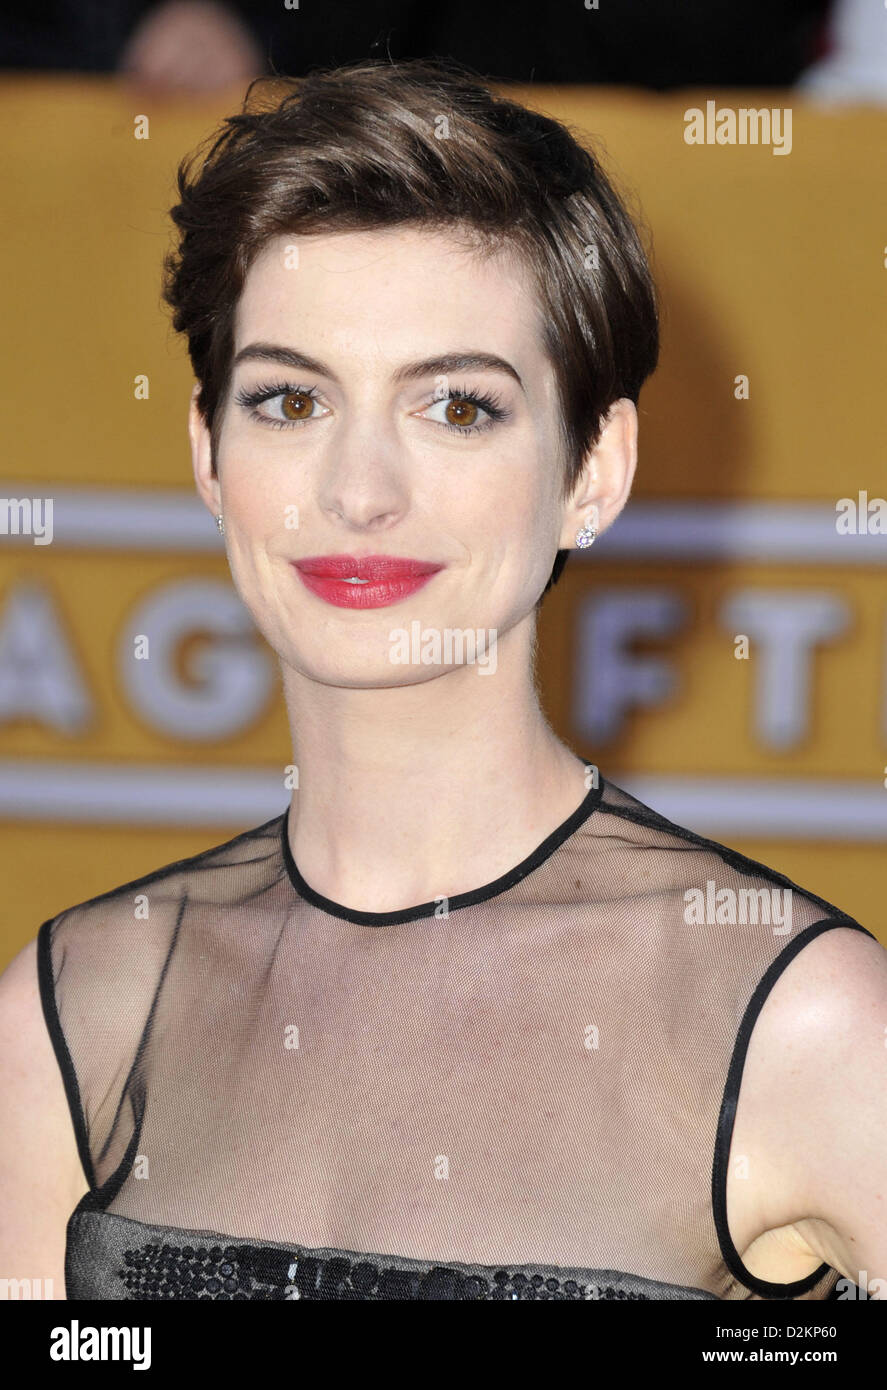 Los Angeles, California, USA. 27th January 2013. ANNE HATHAWAY arrives on the red carpet wearing a floral Erdem dress, which she accessorized with custom vegan Giuseppe Zanotti heels, a Christian Louboutin clutch and Pomelatto jewelry, for the 19th Annual Screen Actors Guild Awards at the Shrine Auditorium. 2013(Credit Image: Credit:  D. Long/Globe Photos/ZUMAPRESS.com)  ZUMA Press, Inc. / Alamy Live News Stock Photo